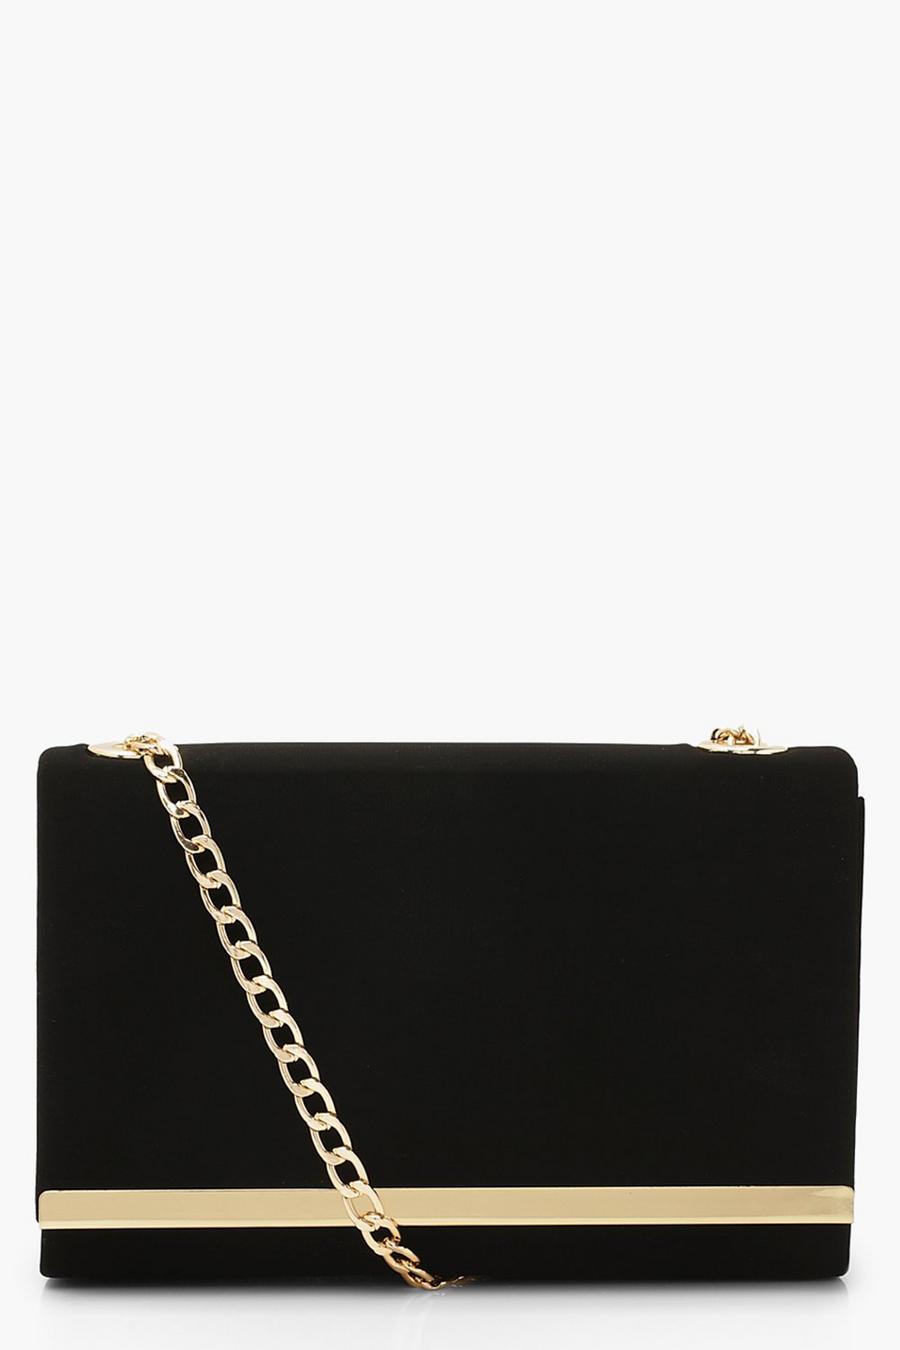 Boohoo Women's Structured Suedette Clutch Bag and Chain